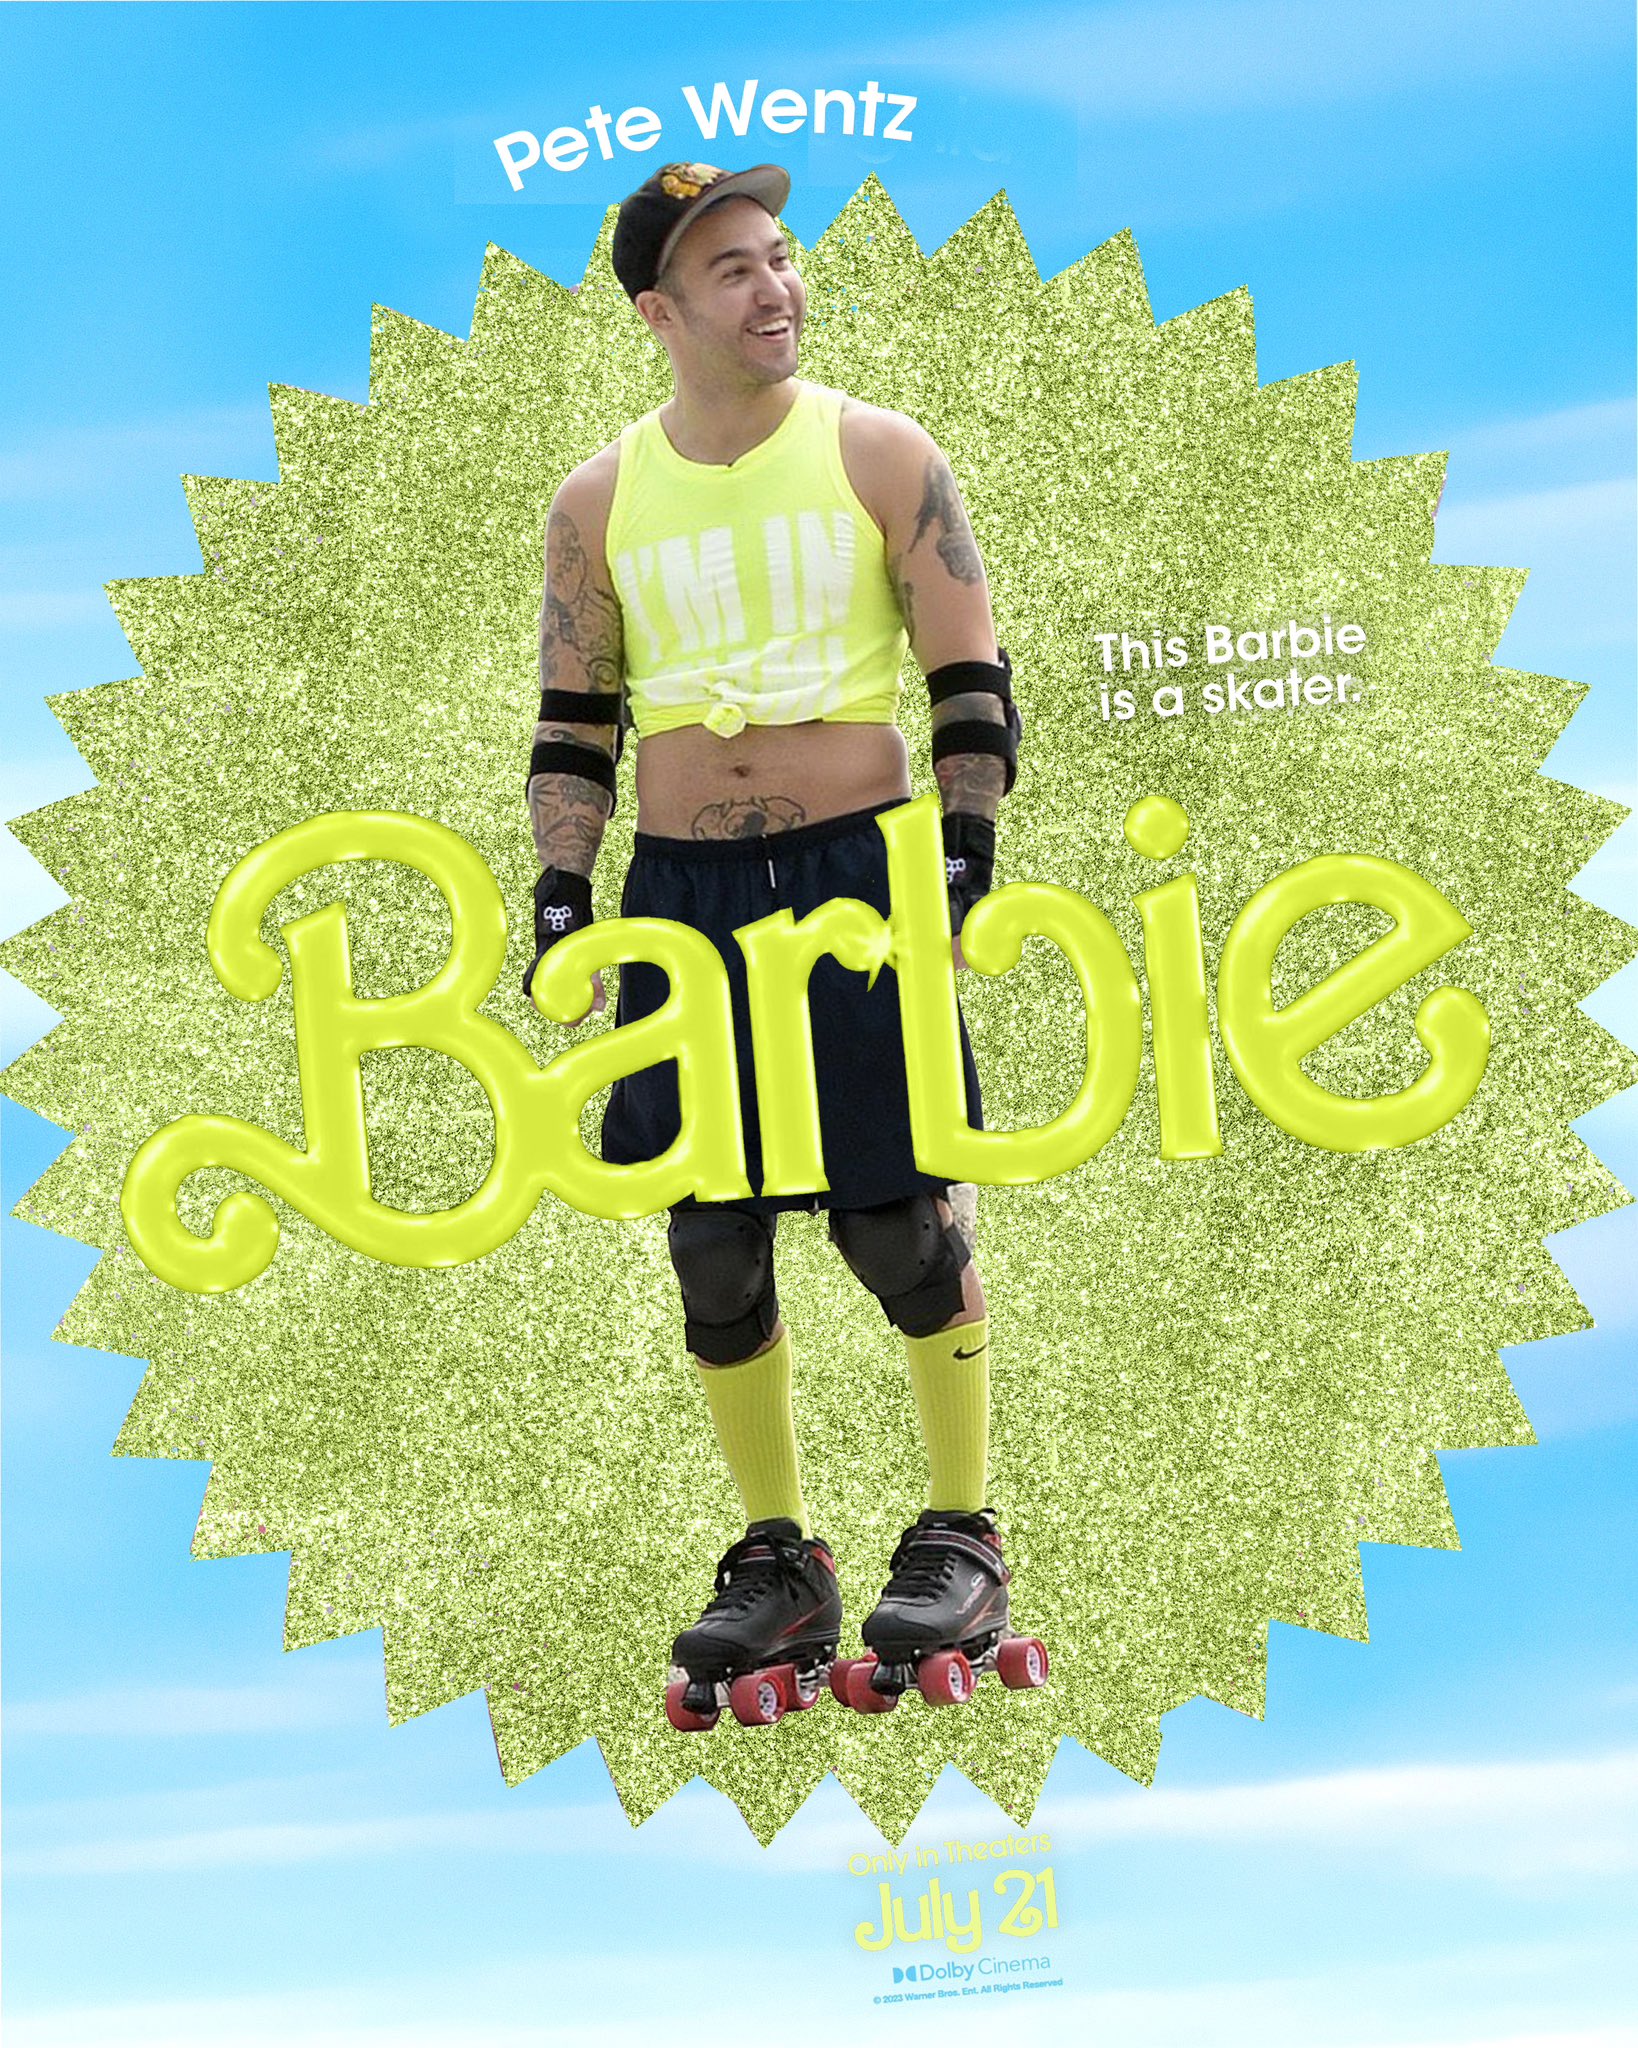 poster - Pete Wentz This Barbie is a skater Barbie Julu 21